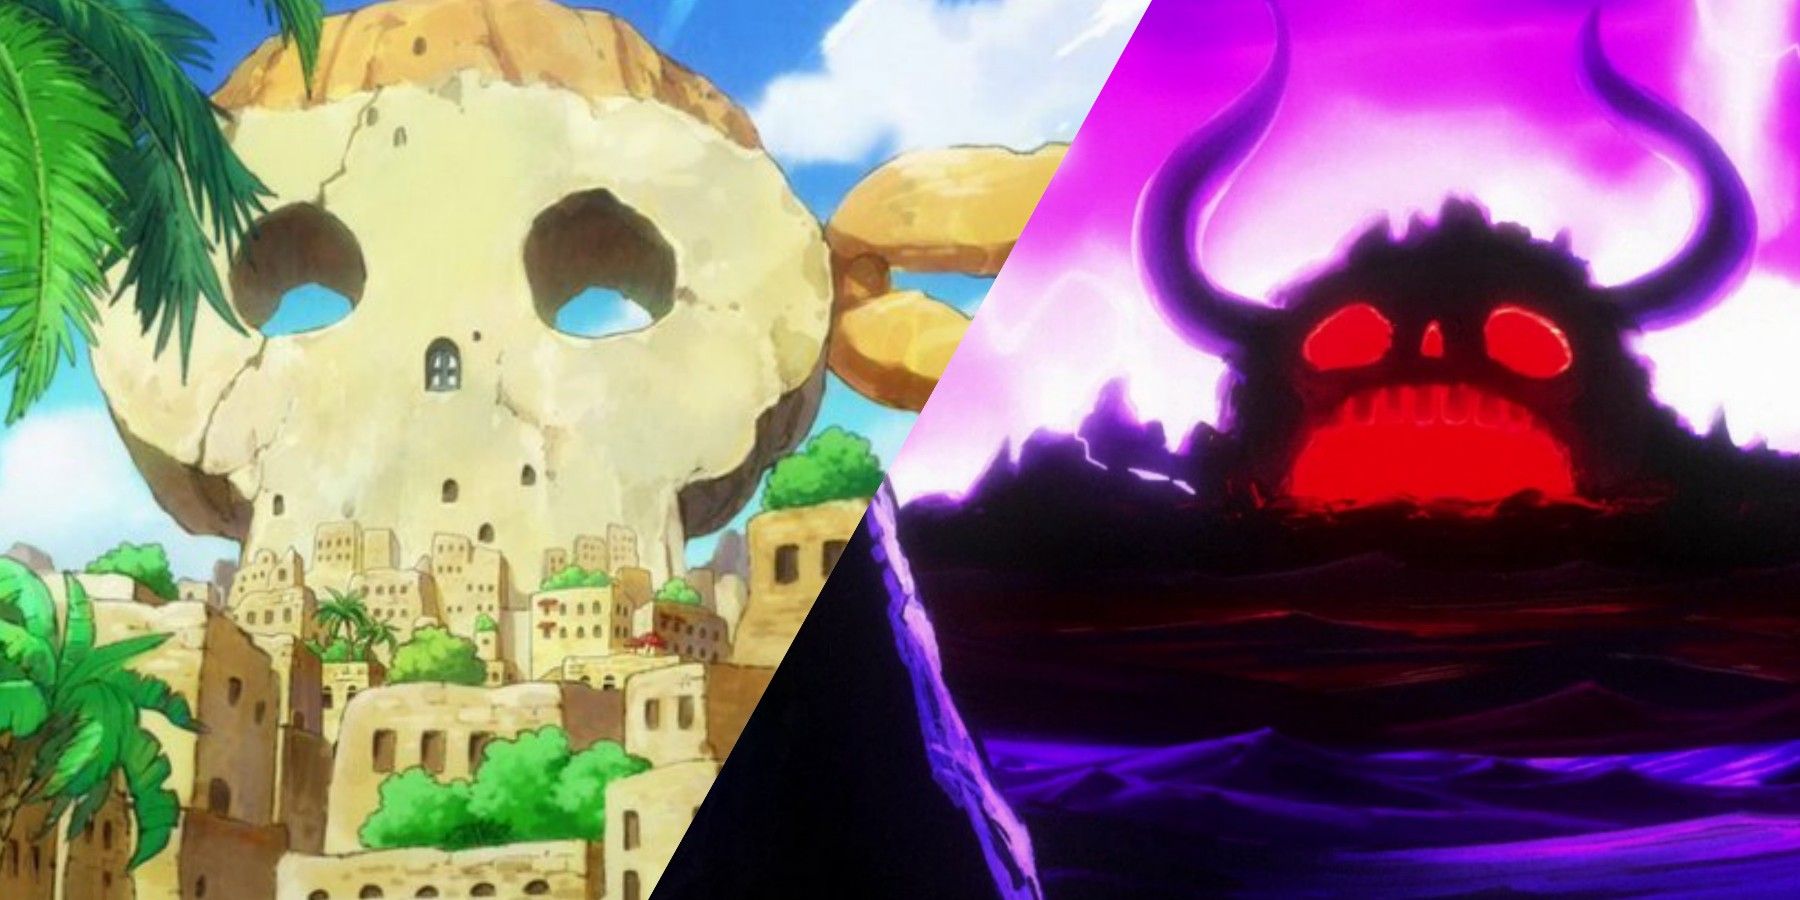 In the world of One Piece, is there a mainland or is it all